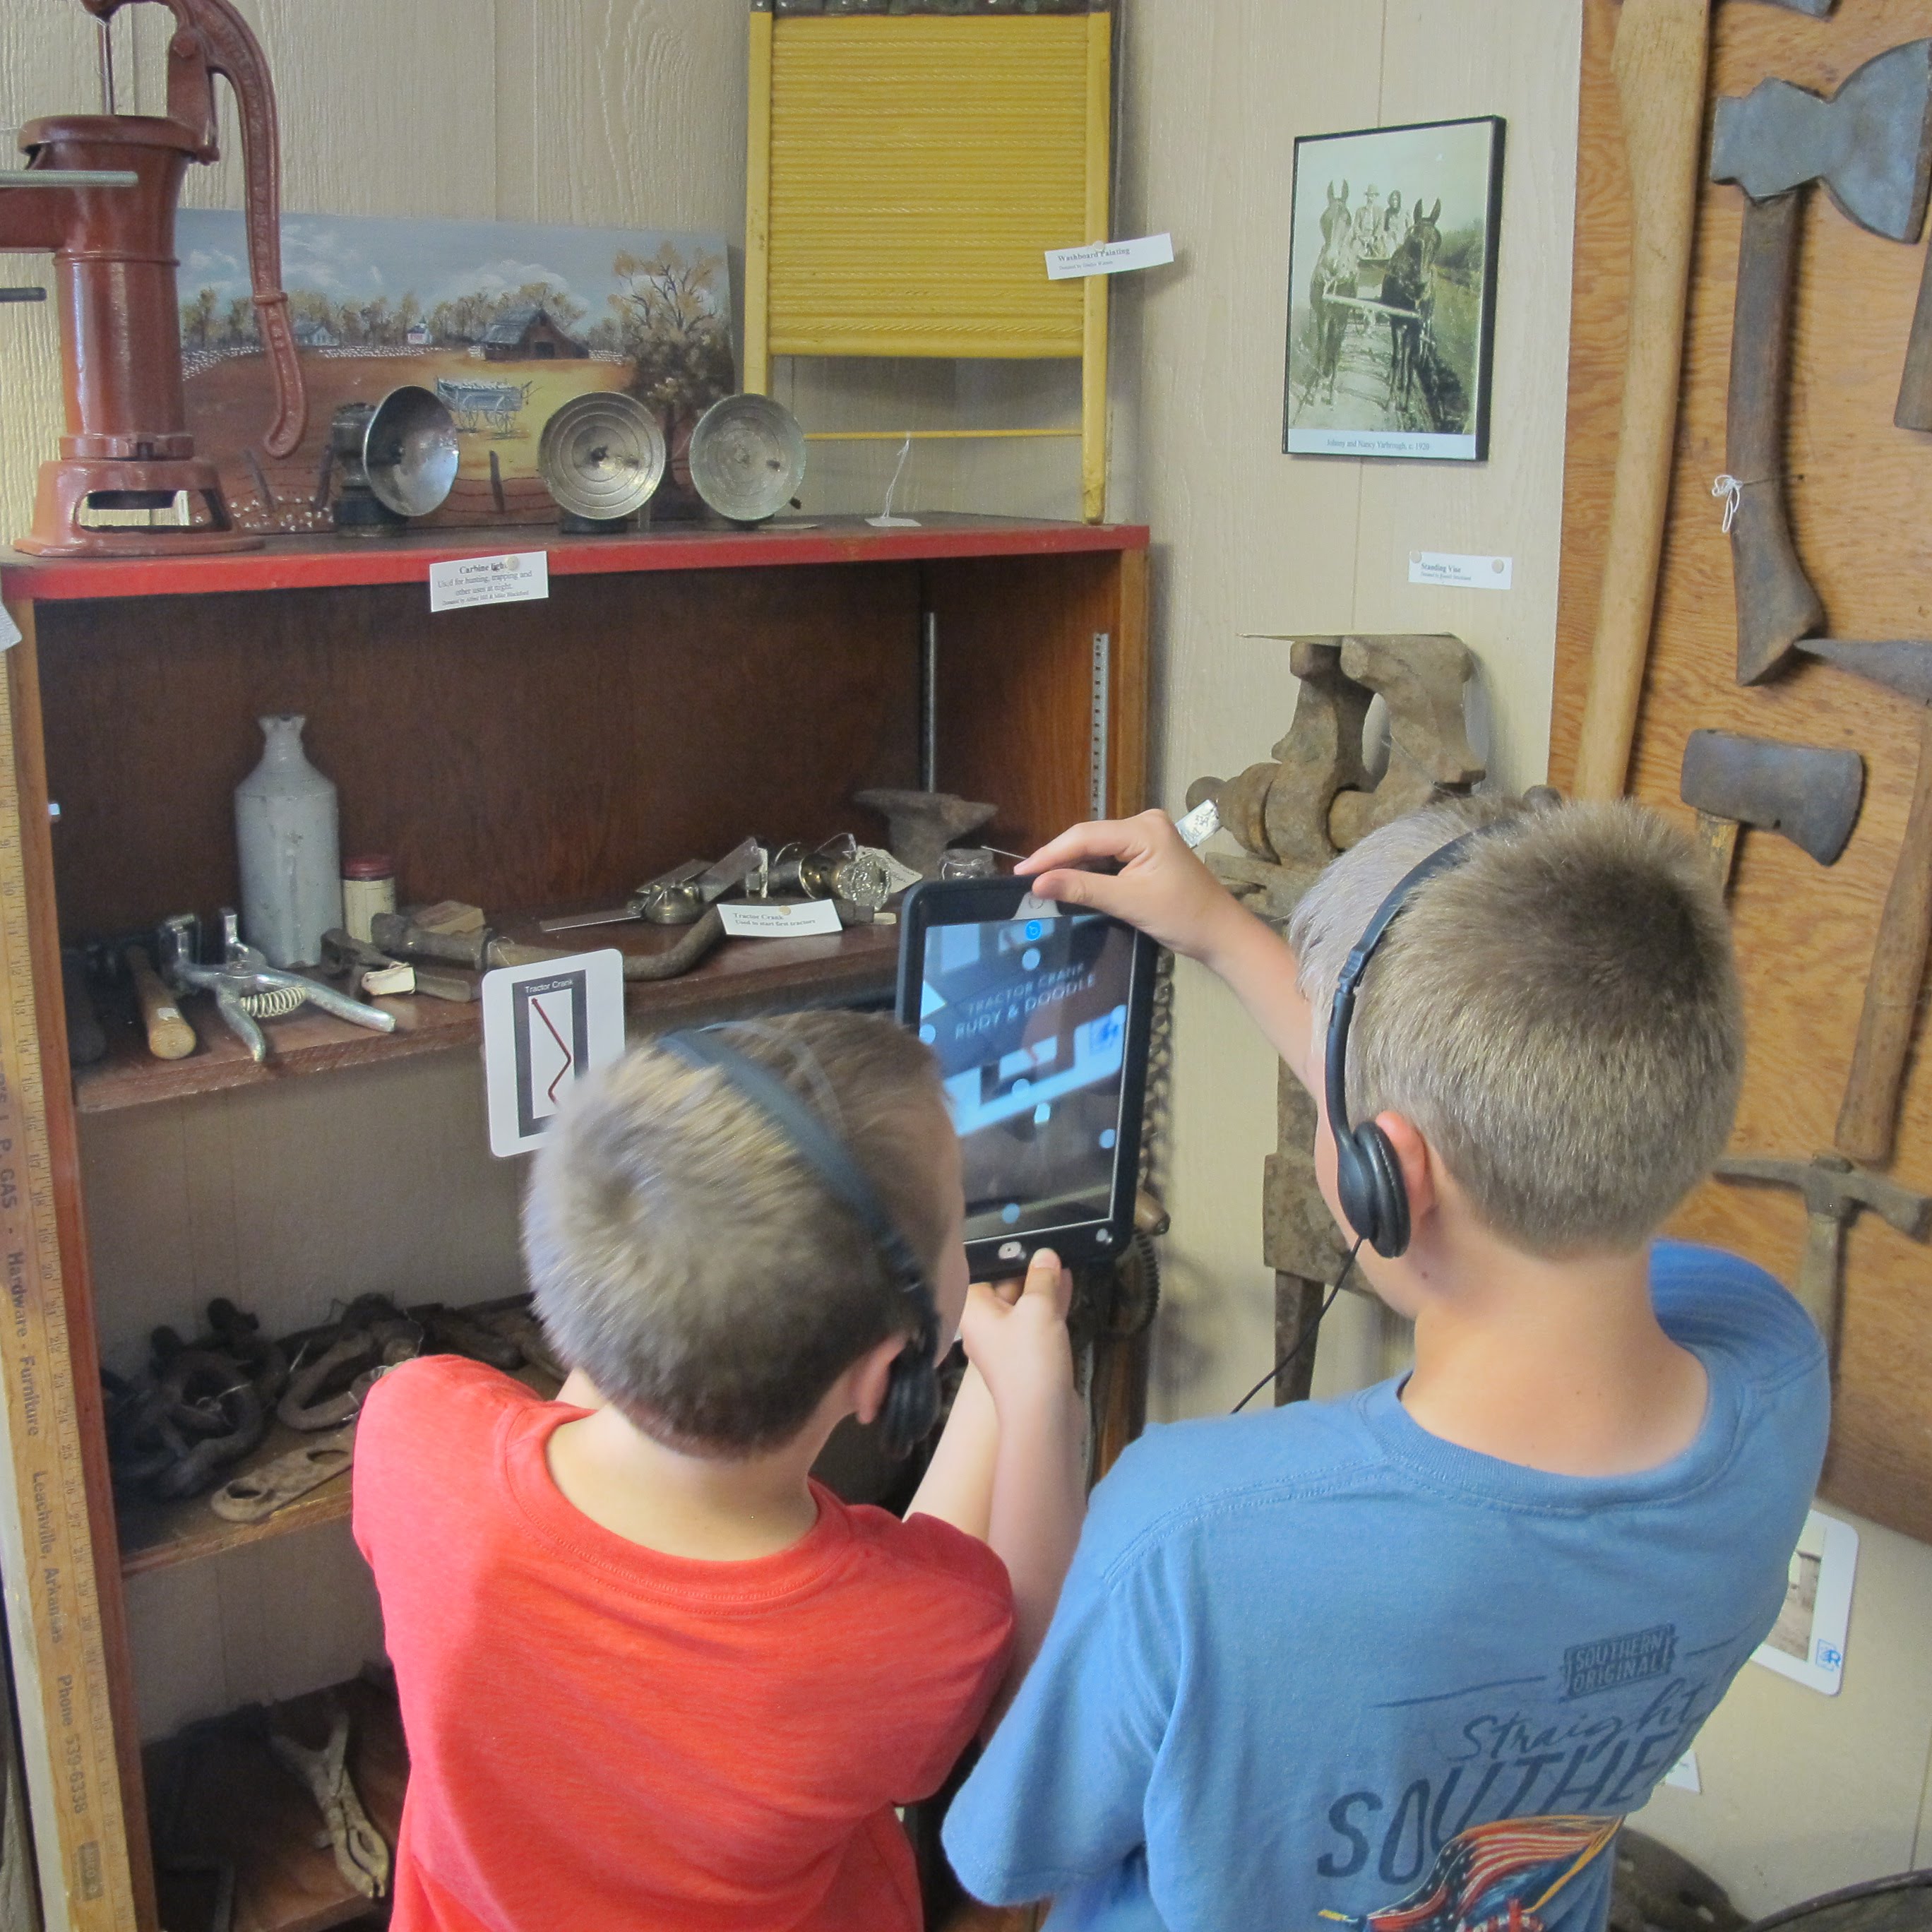 Kids using iPads in Museum exhibition to view augmented reality videos.